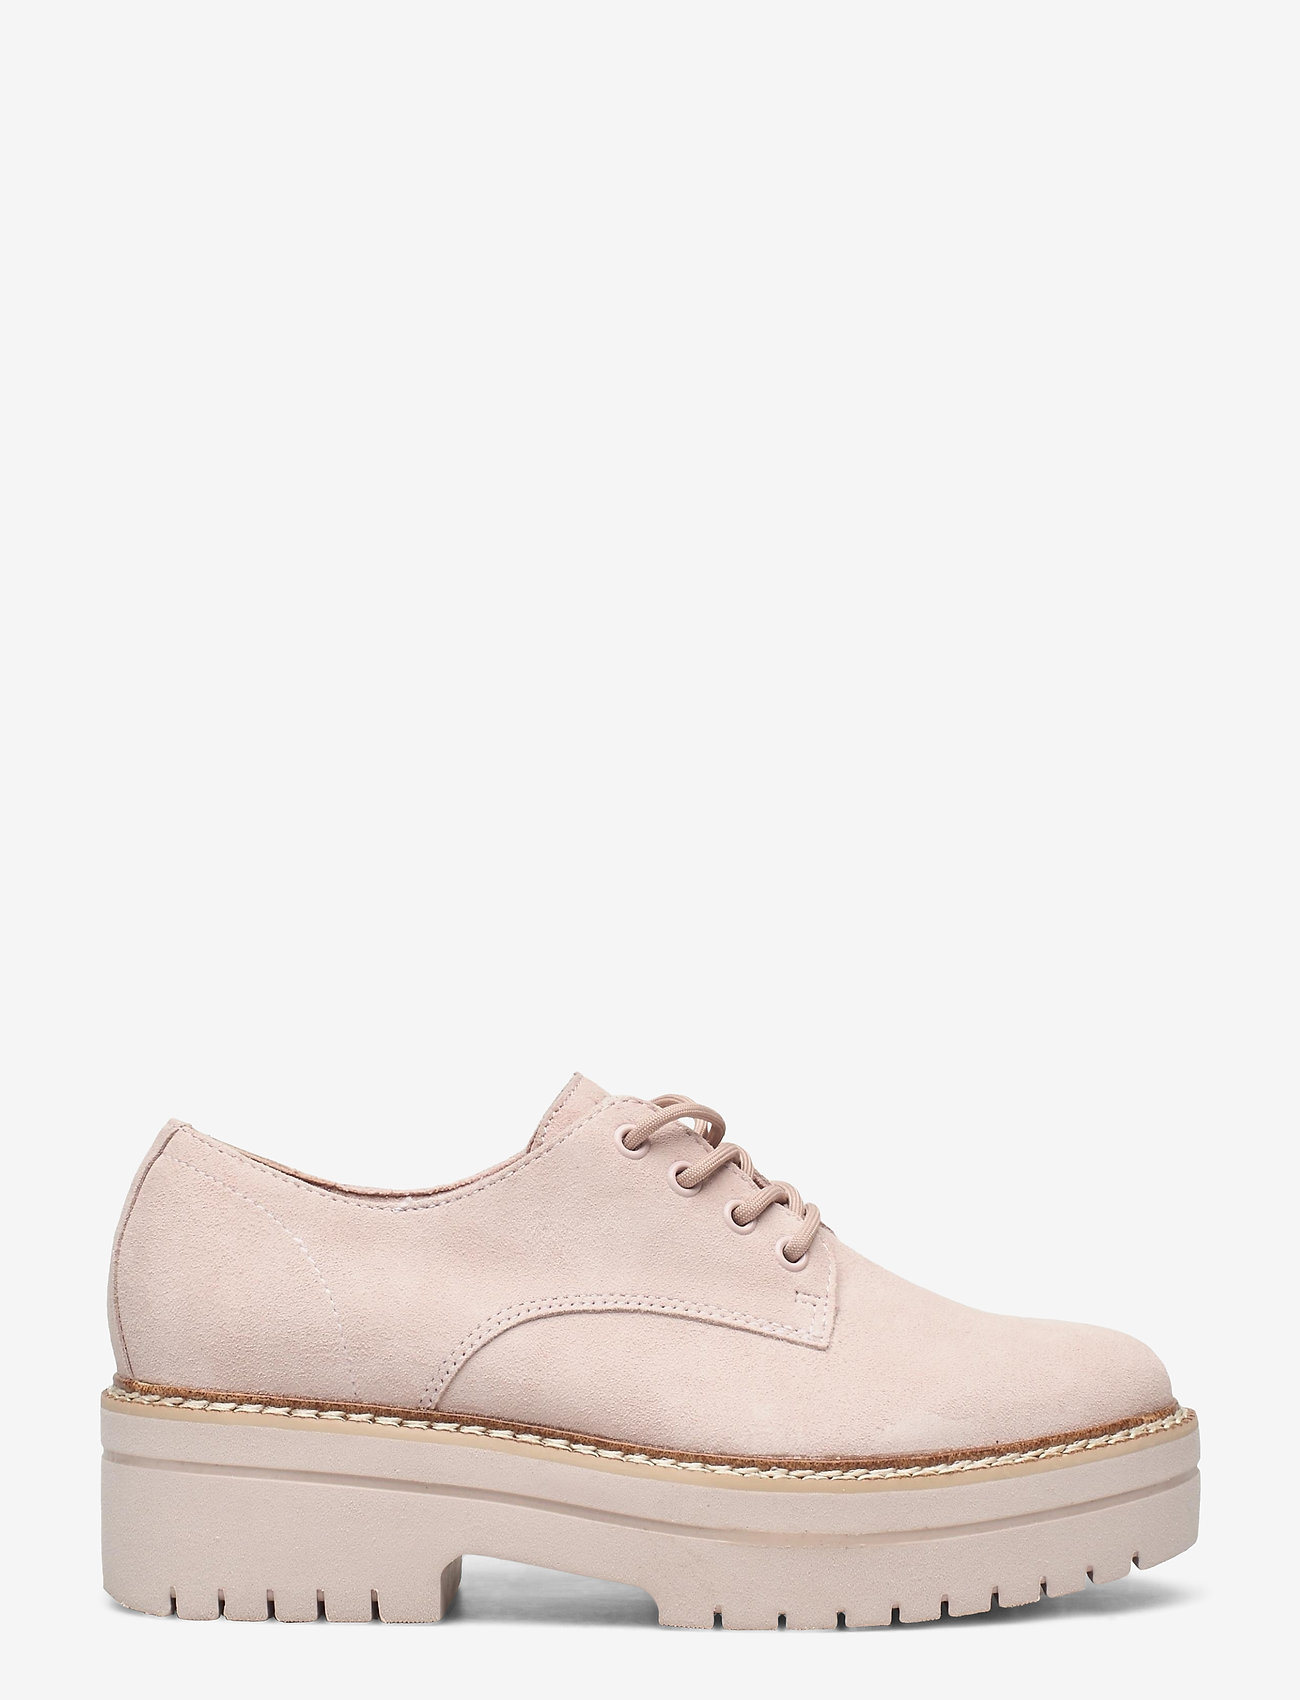 Woms Lace-up (69.95 €) - - | Boozt.com